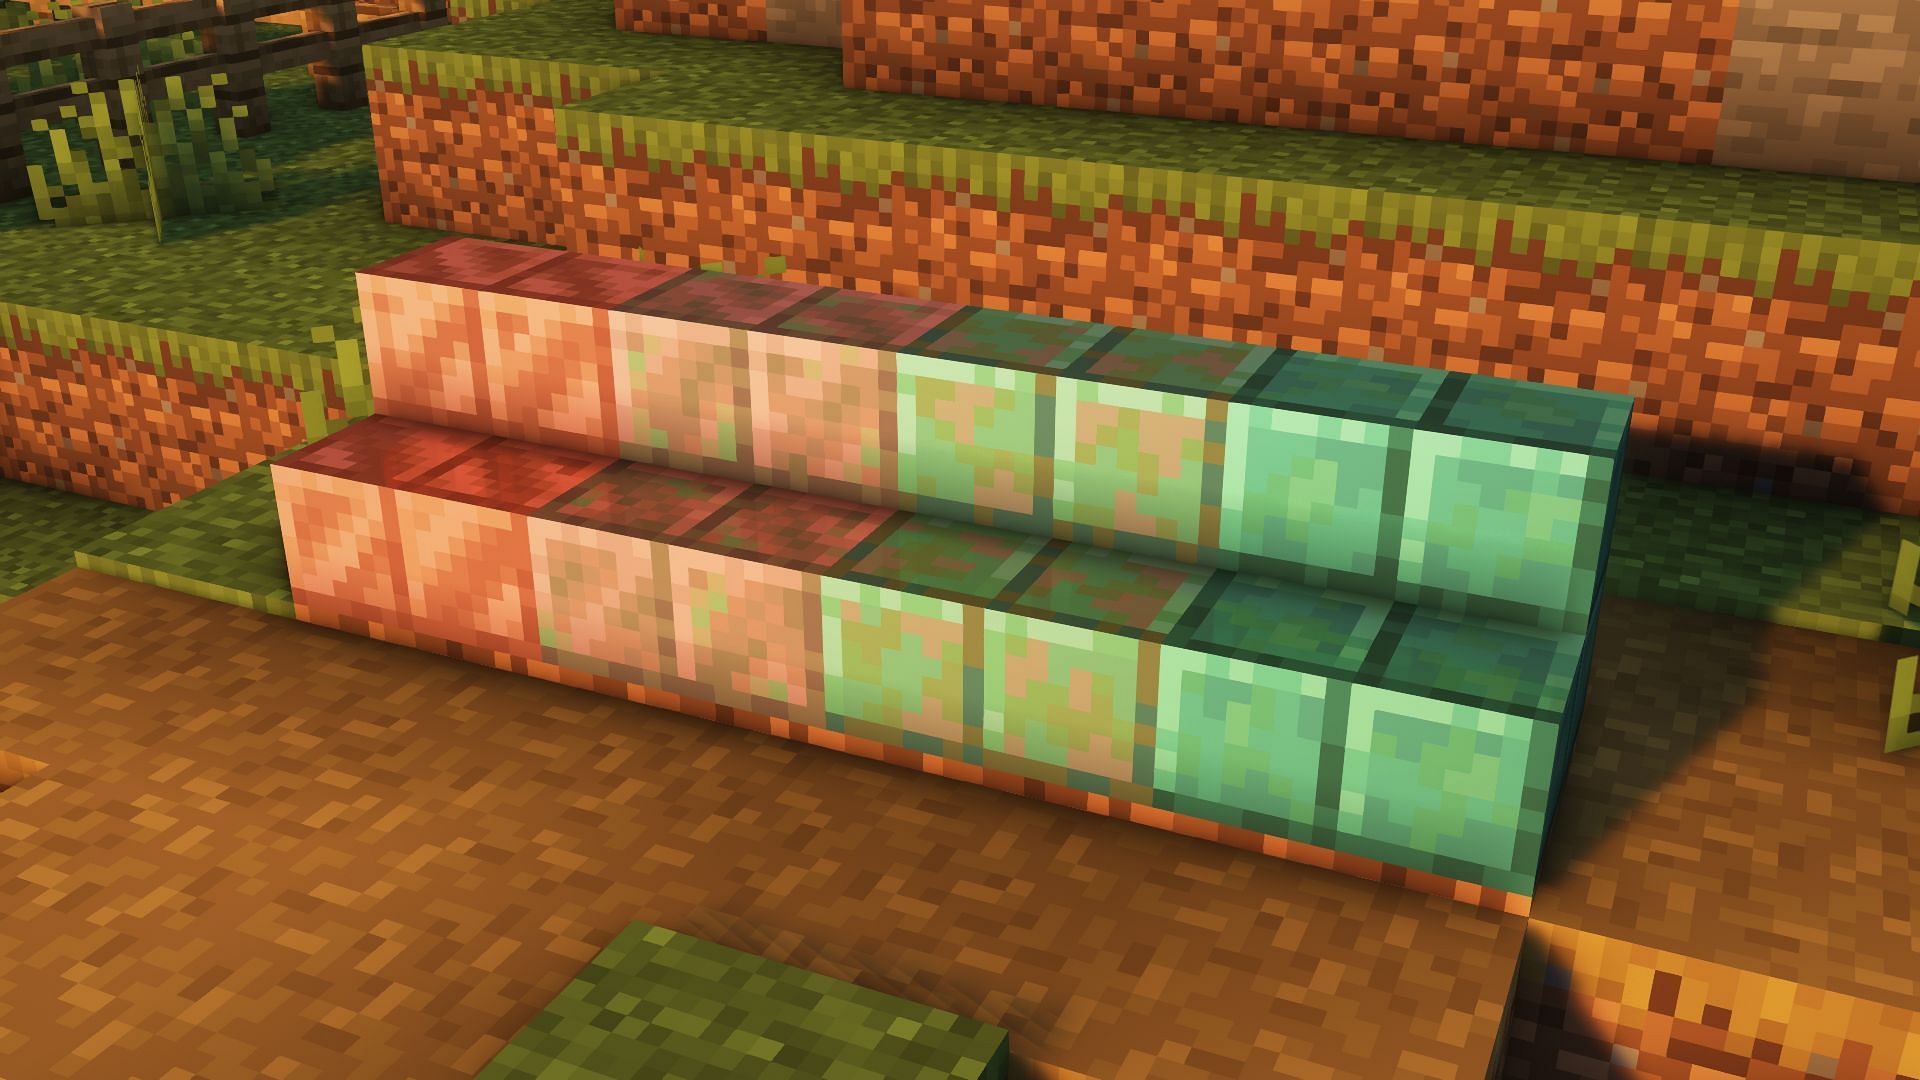 Copper stair variations in Minecraft (Image via Mojang)